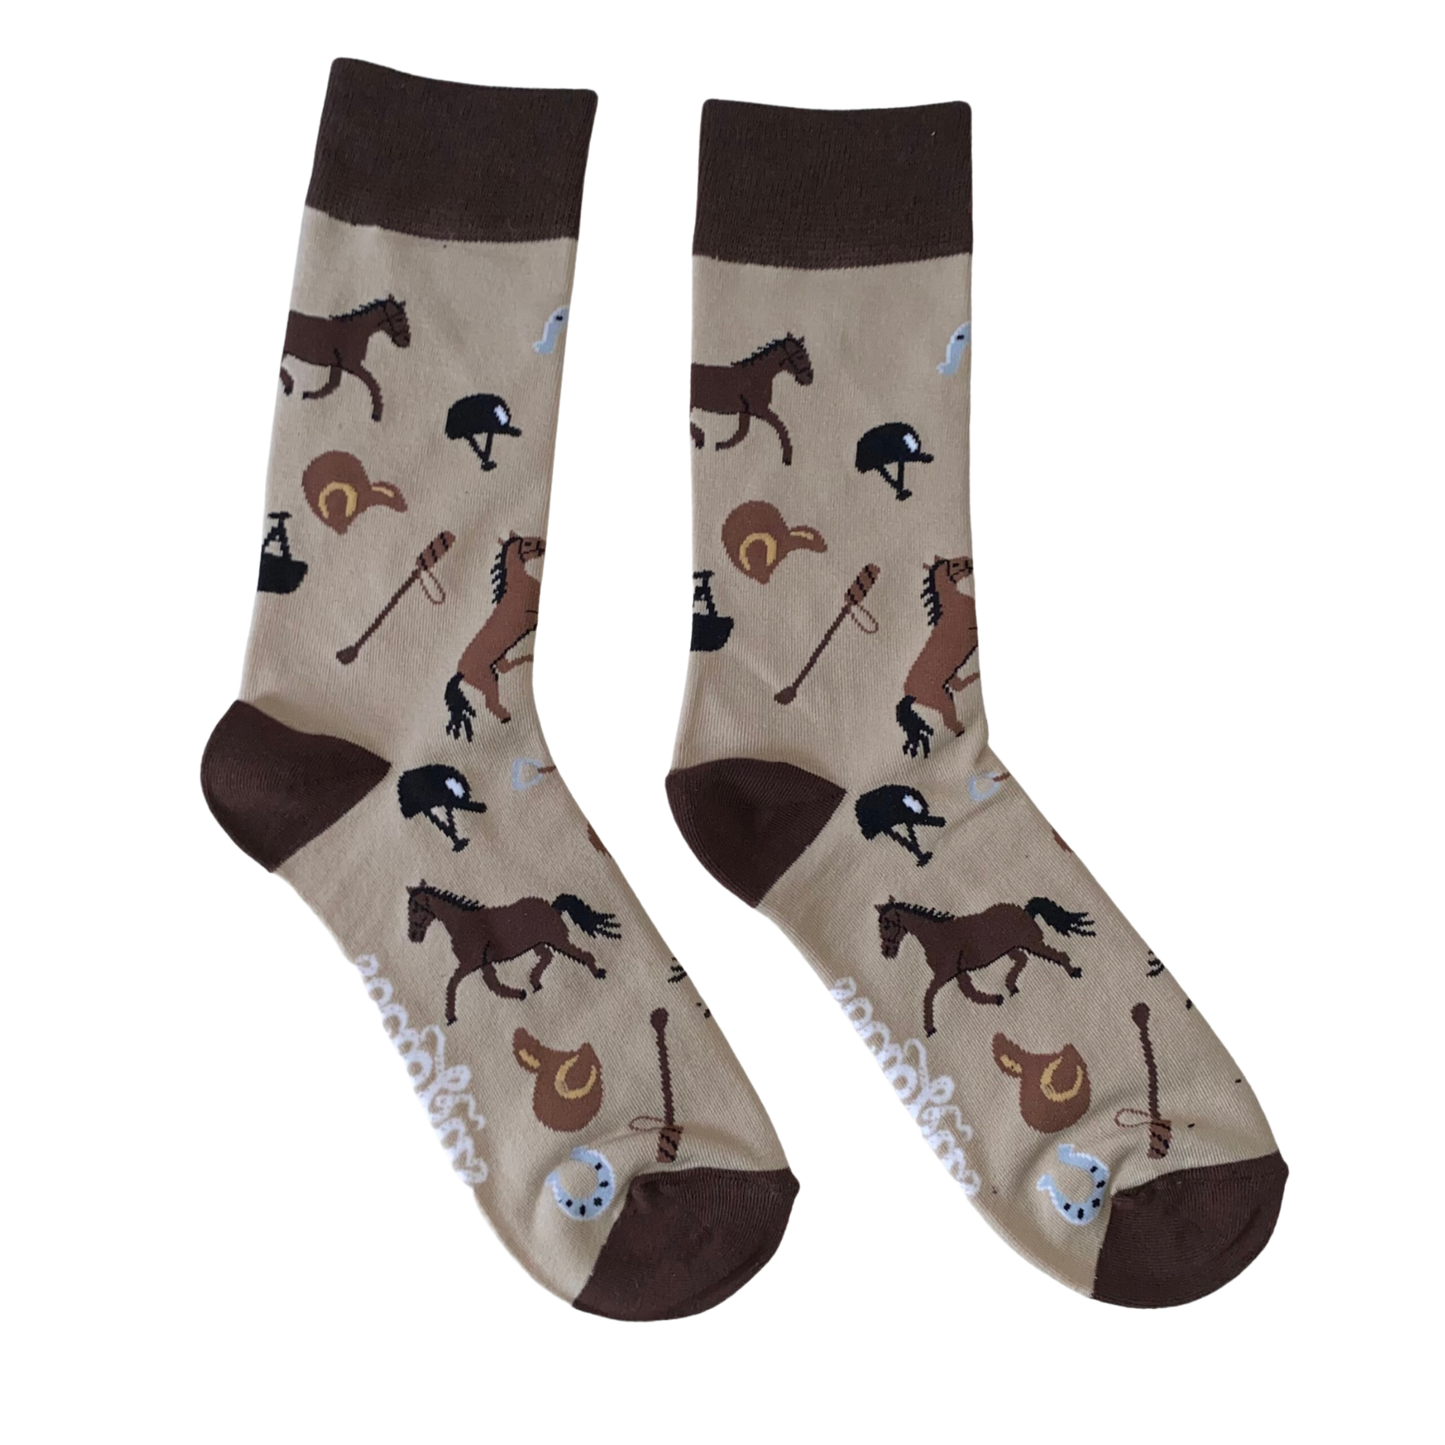 Why The Long Face Socks